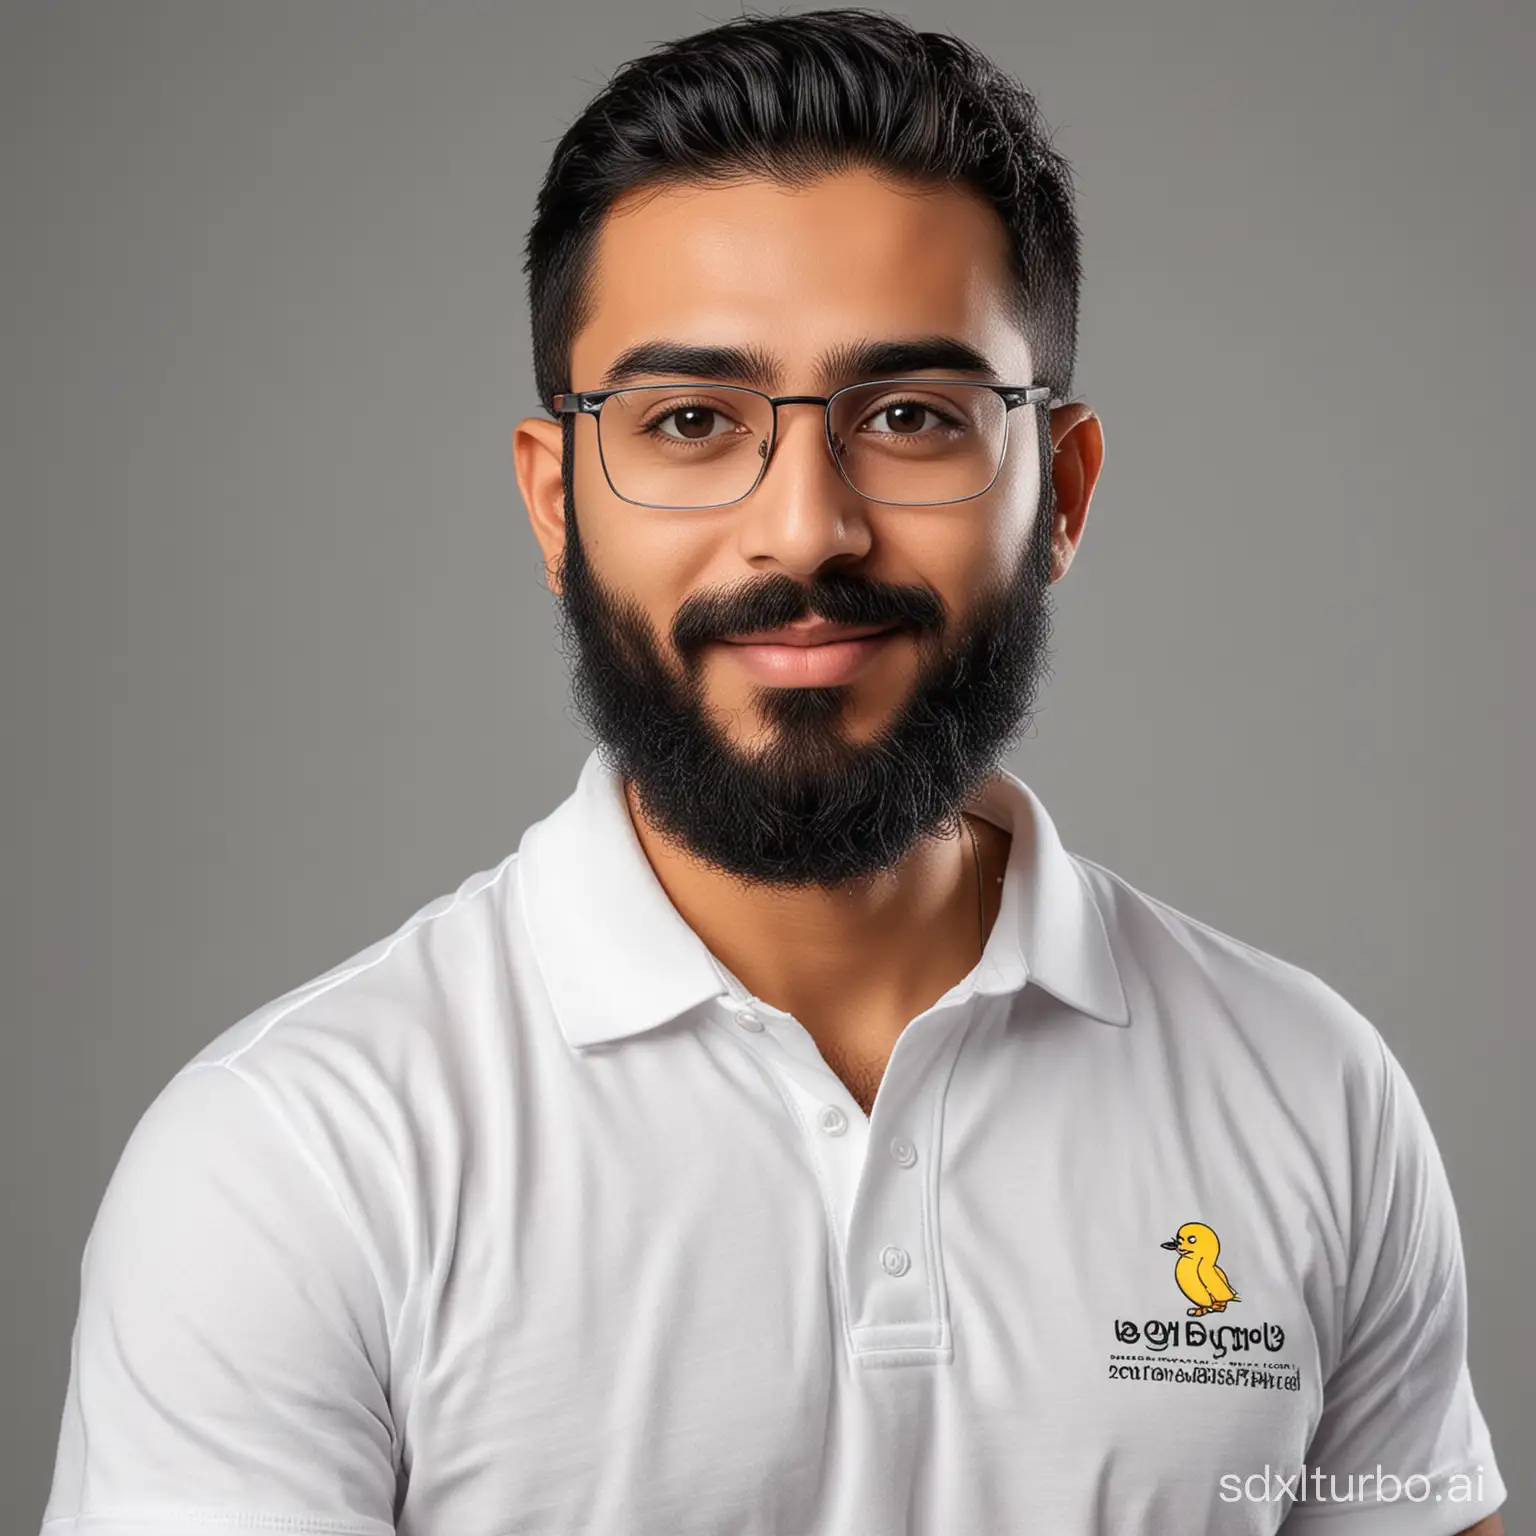 Core Network Engineer at Beyon Telecom Bahrain, name is Duraid Alghadban with a grown beard and a white polo t-shirt with titanium medical glass and a tweety hair style